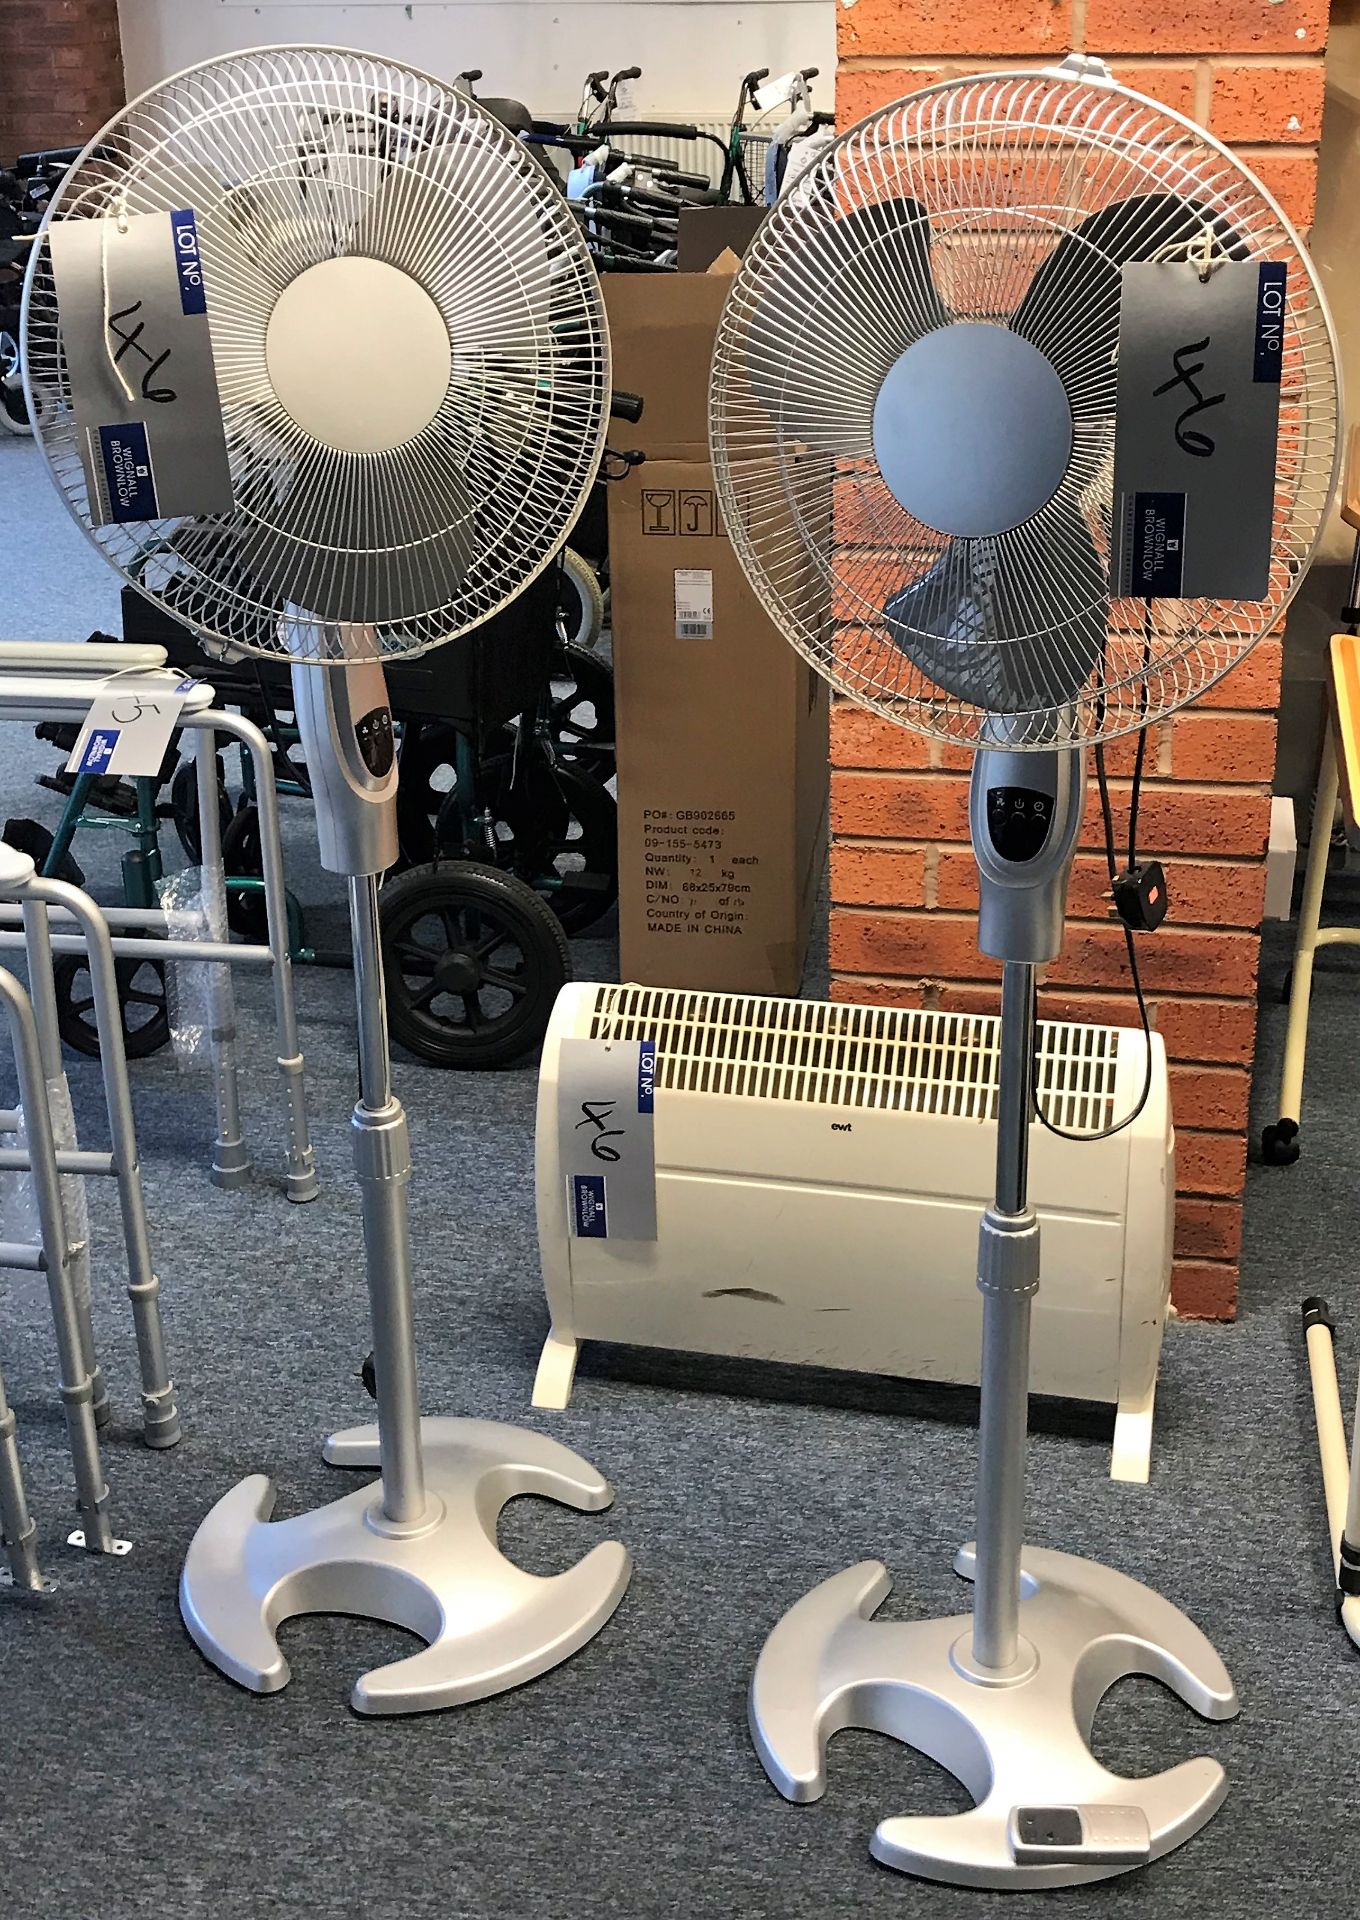 2 B and Q 40cm Pedestal Fans with ewt Electric Heater.